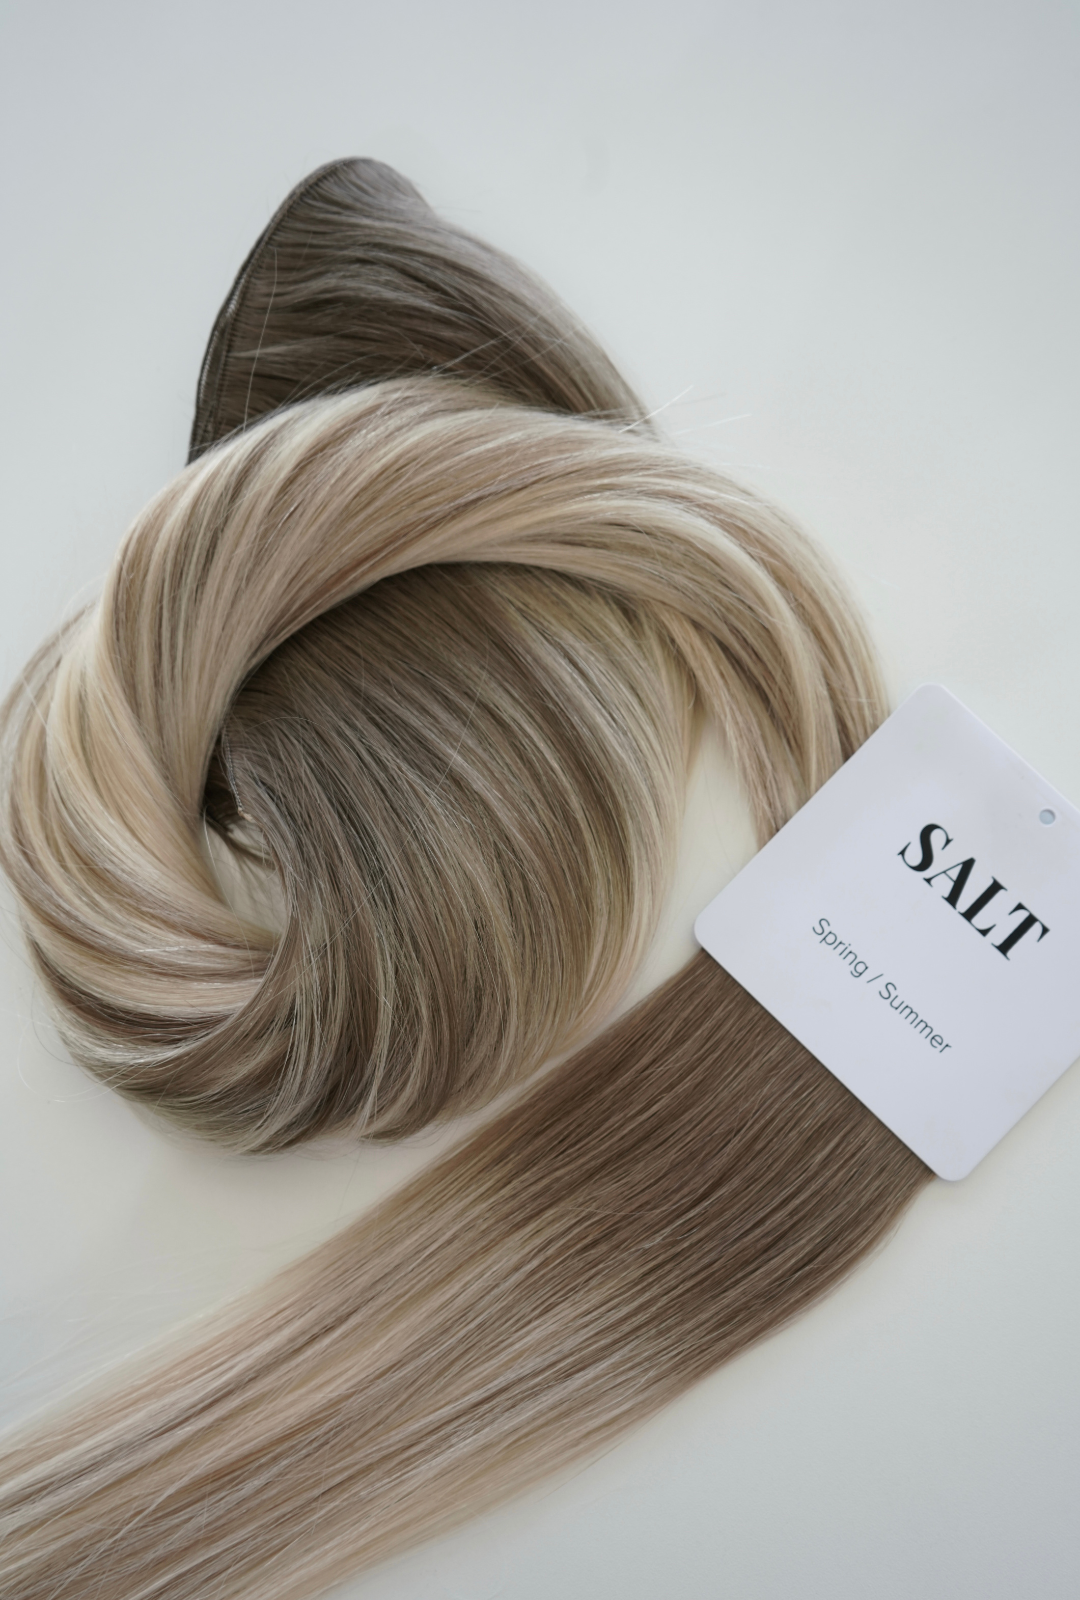 Beachwashed X Laced Hair Machine Sewn Weft Extensions - Salt